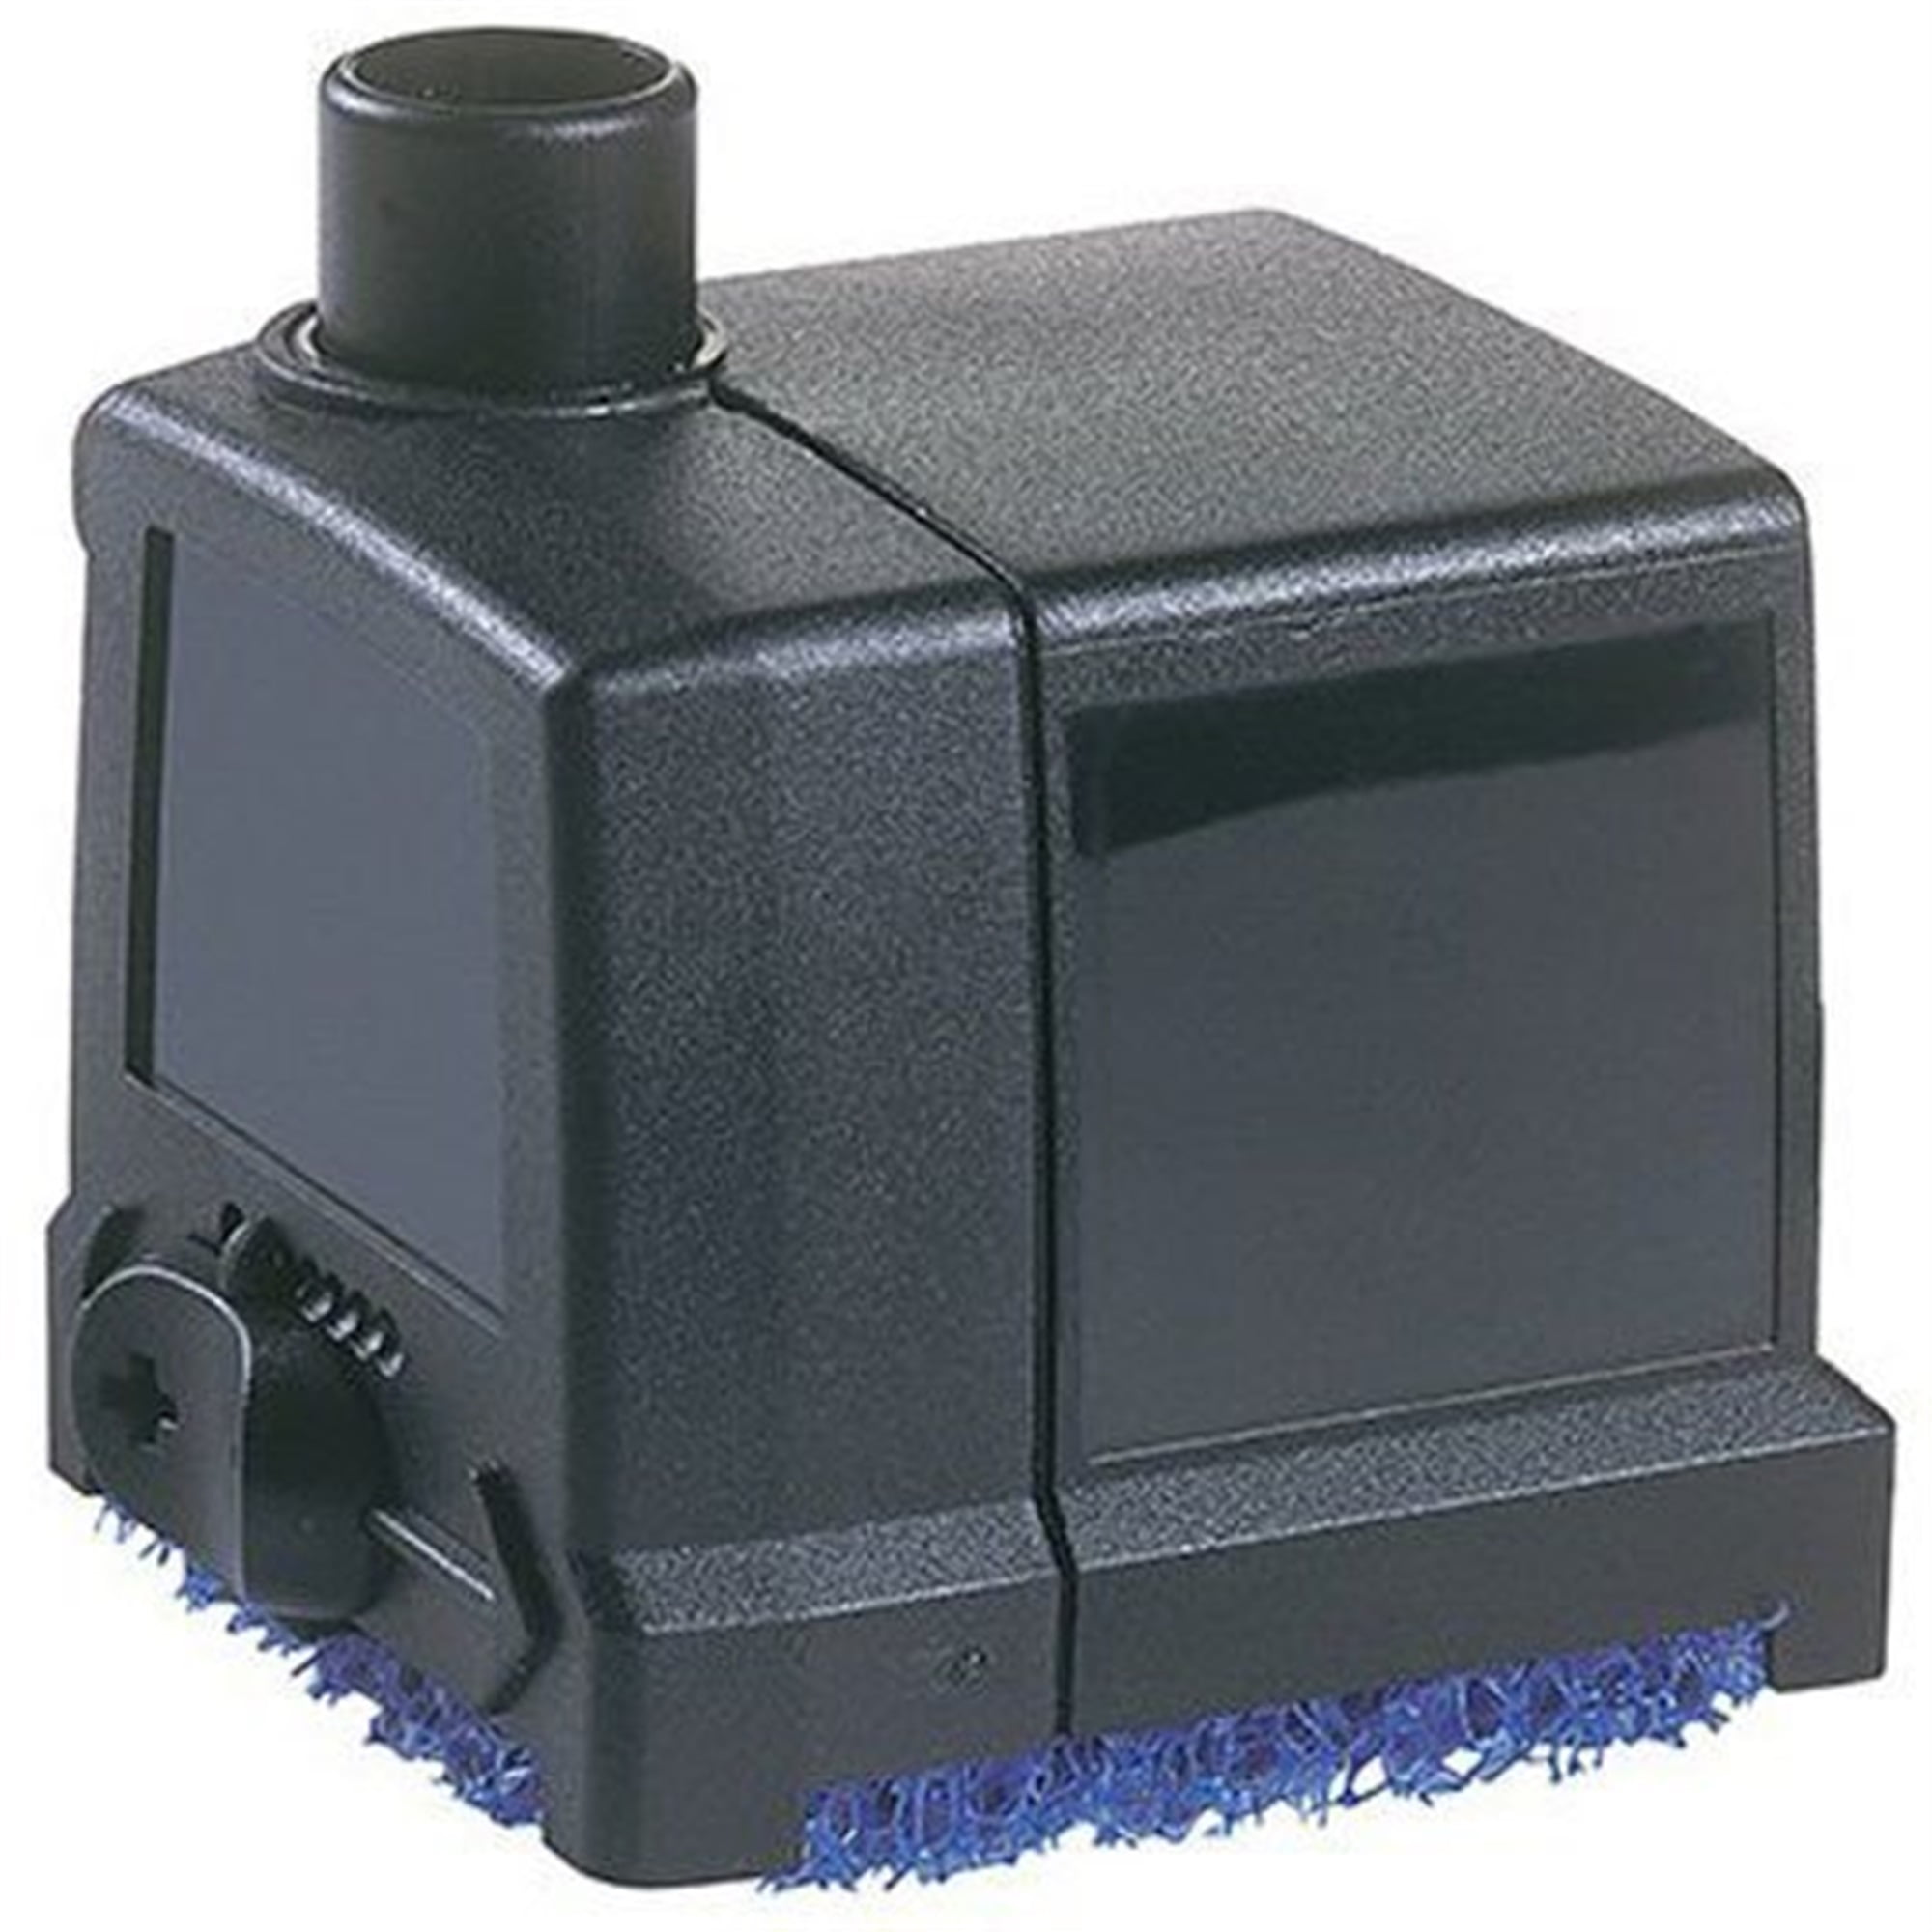 396gph Submersible Outdoor Fountain Pump Powerhead Water Garden Hydroponic Plant 